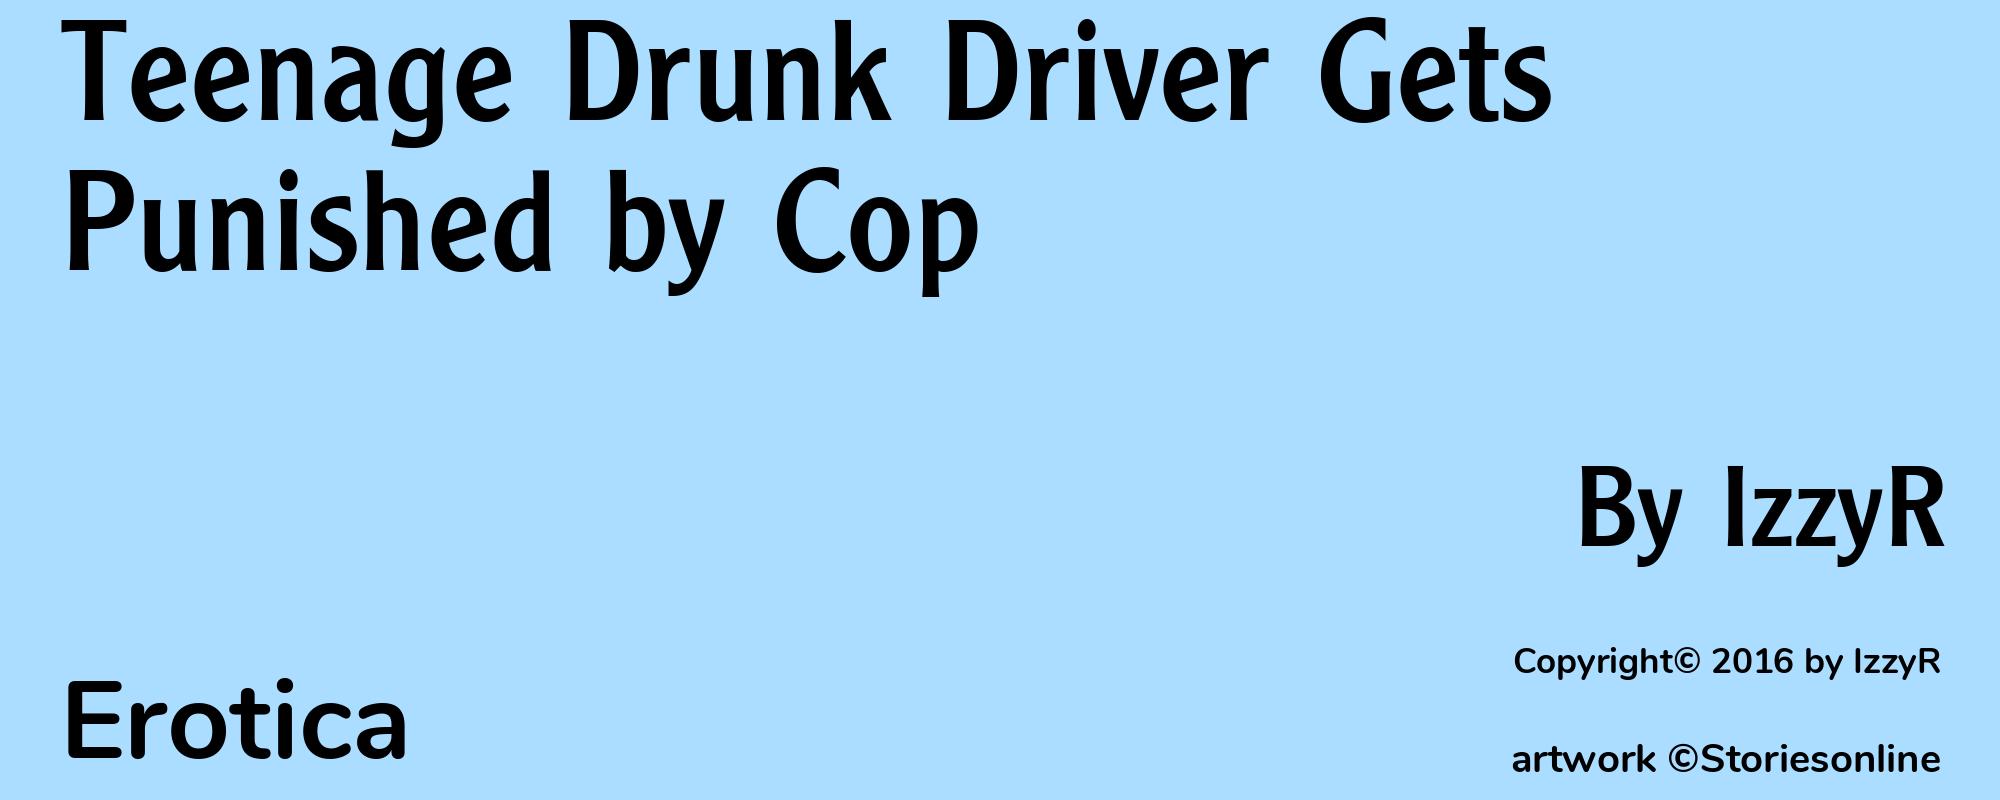 Teenage Drunk Driver Gets Punished by Cop - Cover